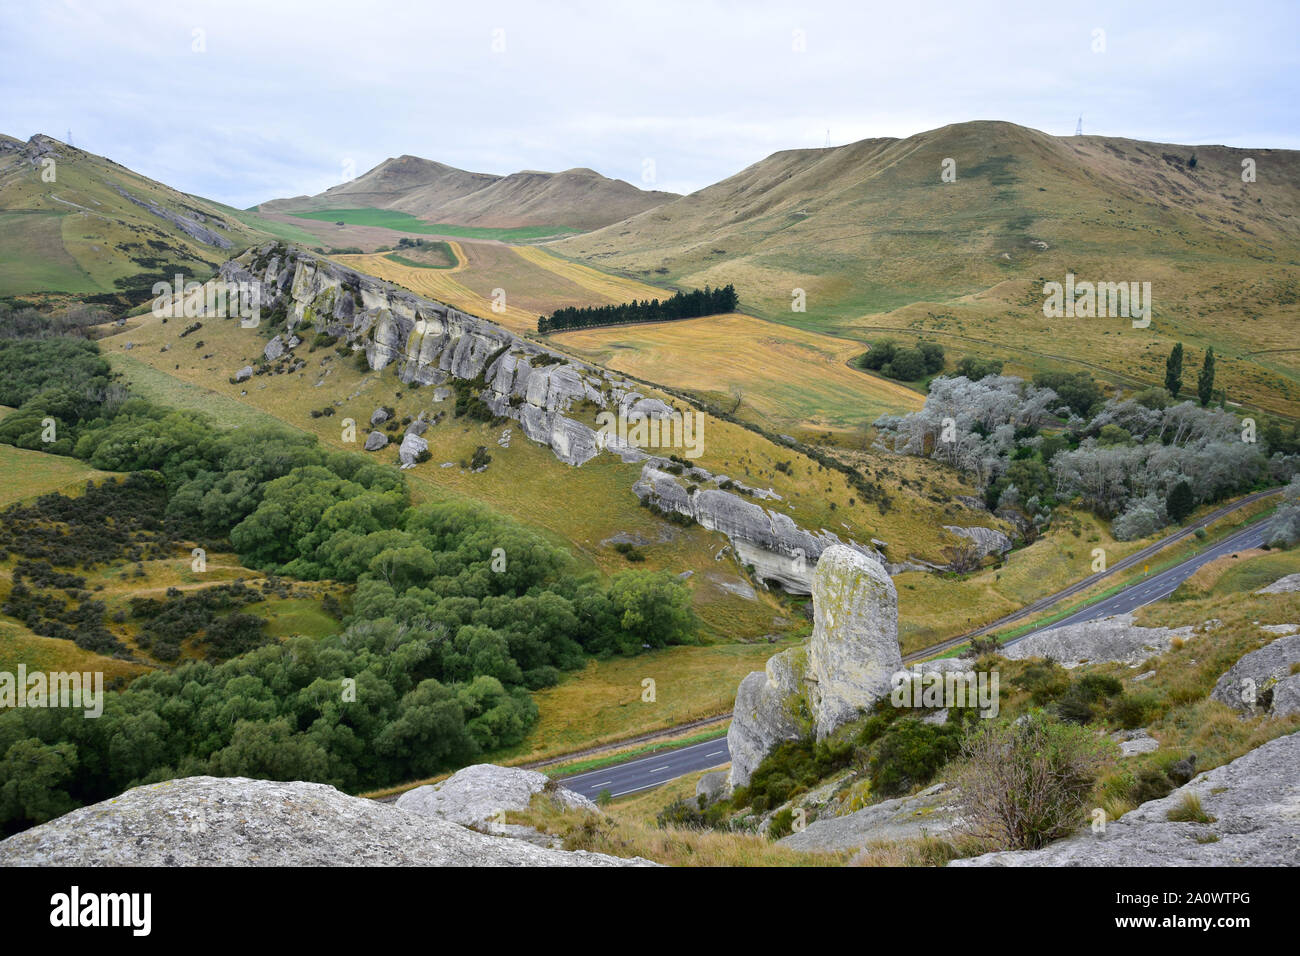 A landscape in New Zealand with the limestone rock formation near the Weka pass, Hurunui district, South Island. A row of trees in the middle. Stock Photo